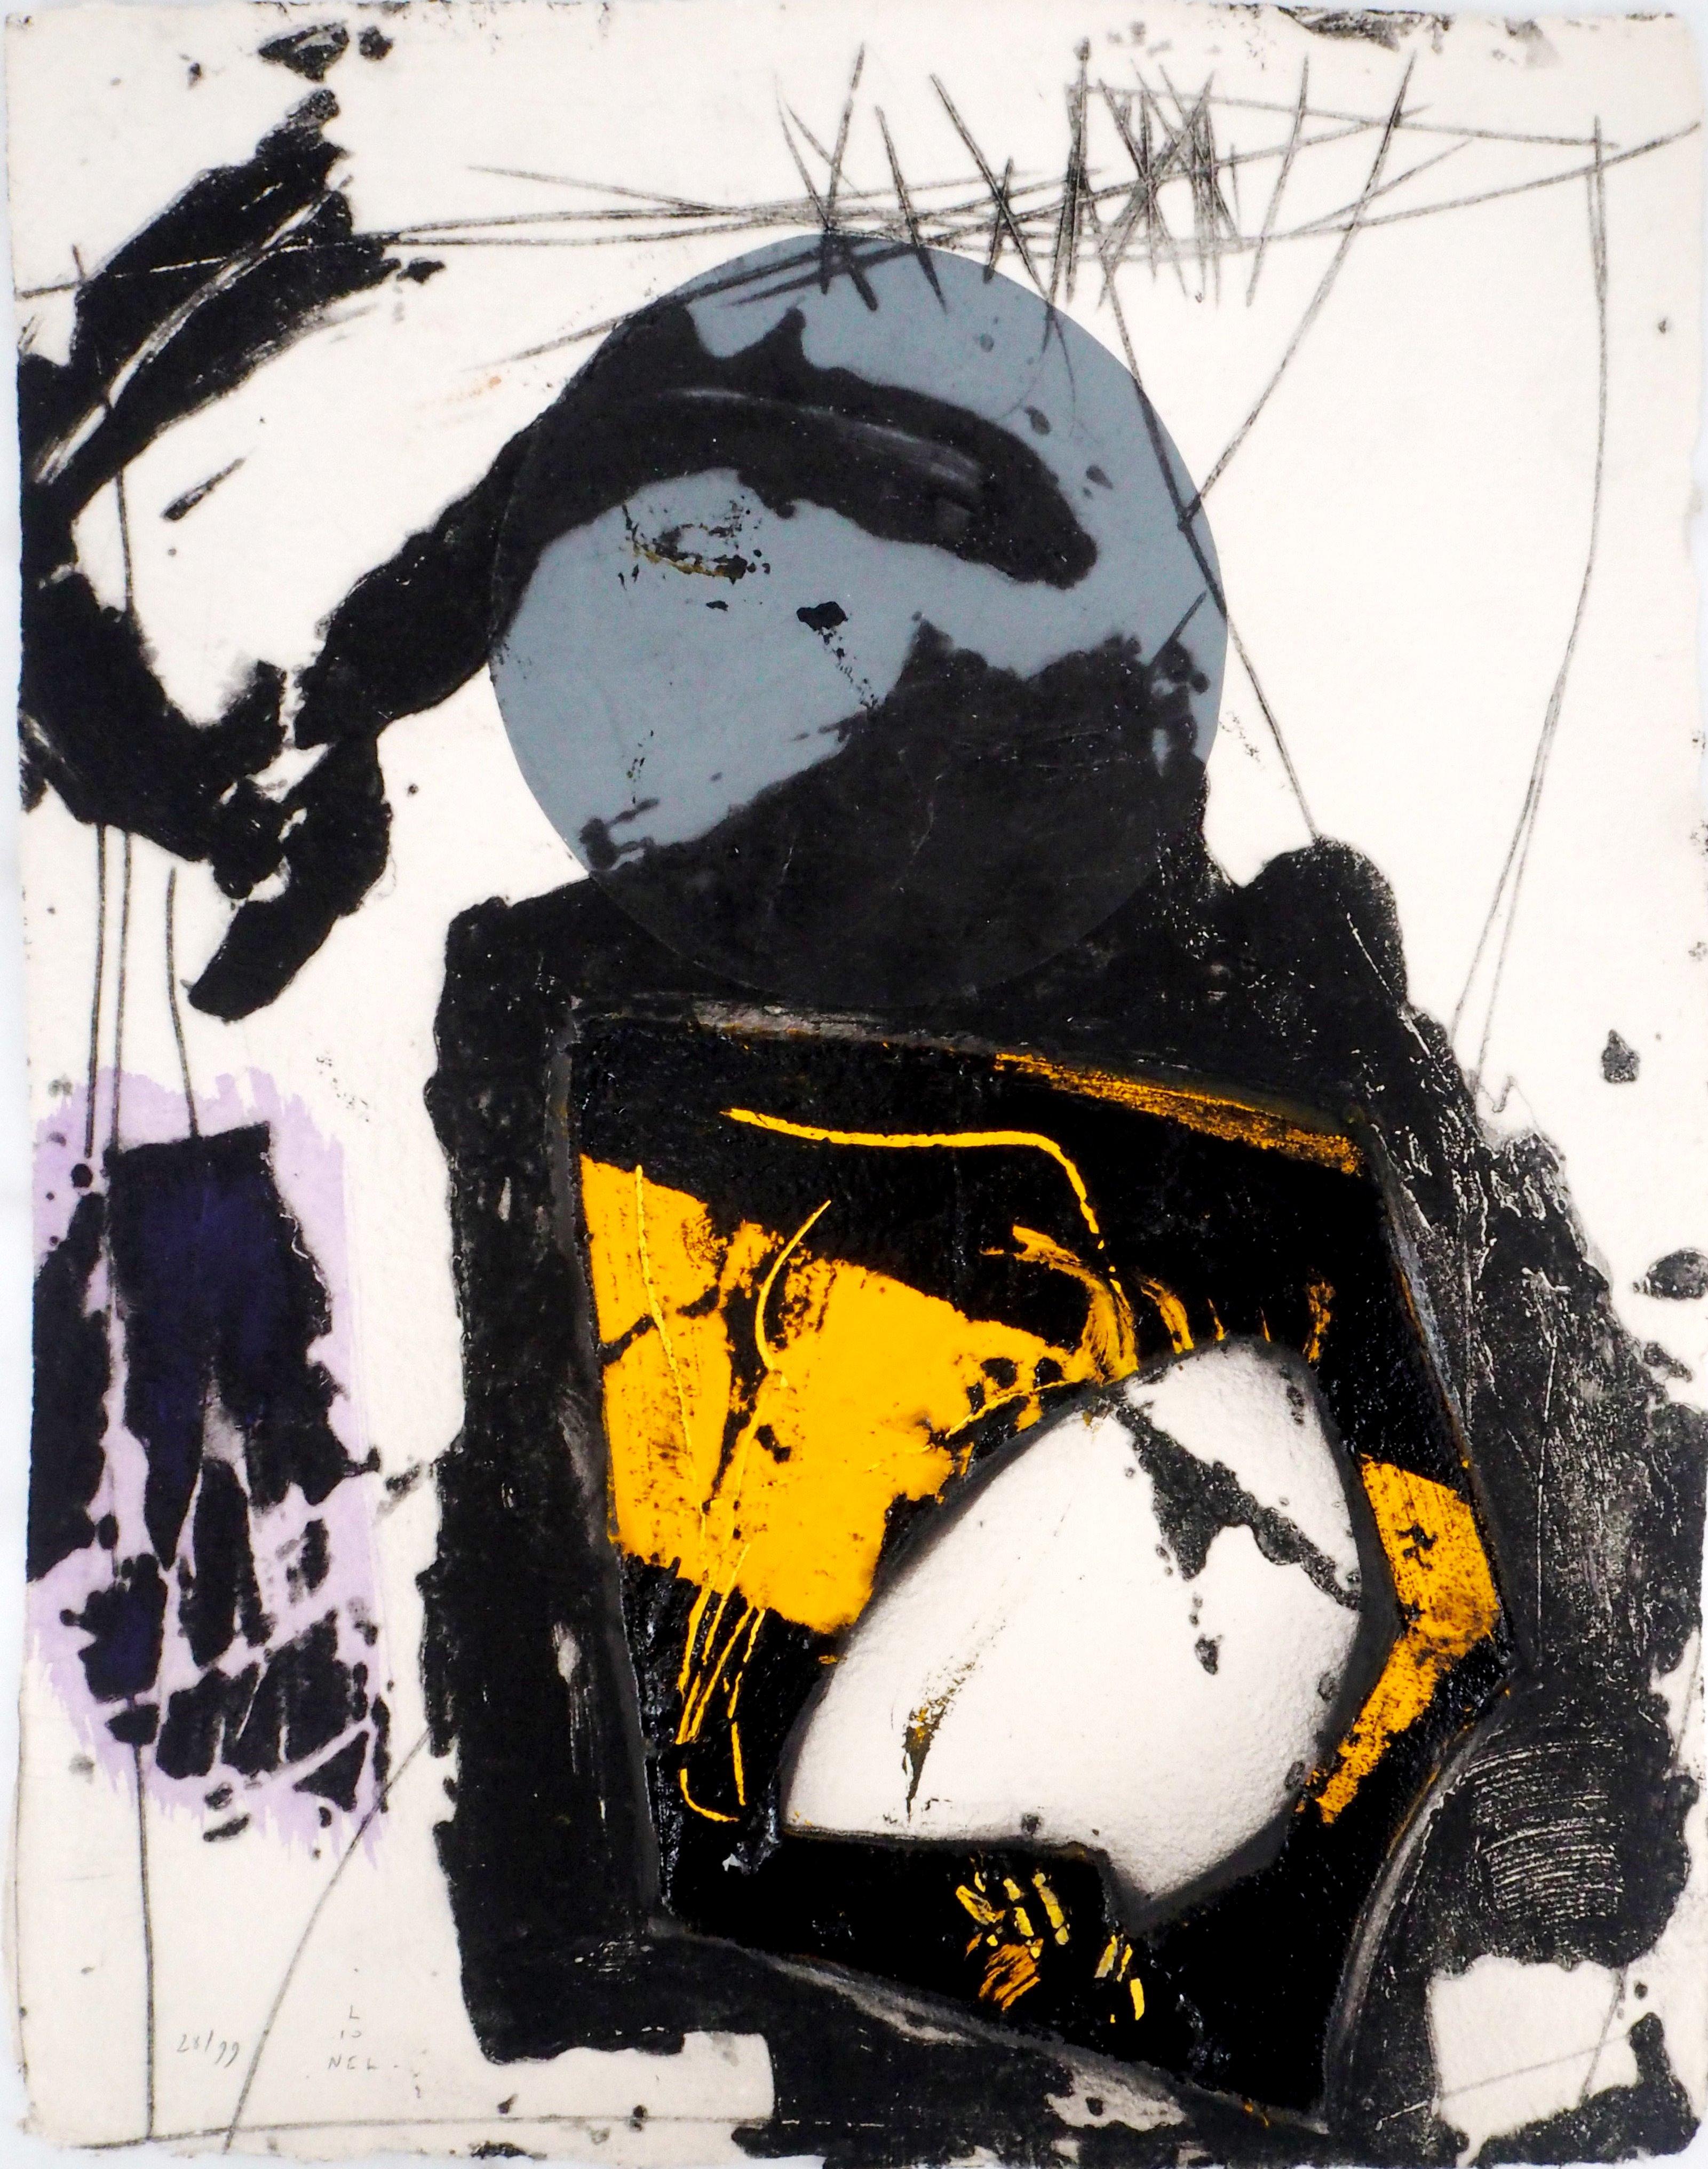 LIONEL  (Lionel PEROTTE, called)
Abstract : Yellow

Original Etching
Handsigned
Numbered /99 copies
On vellum 57 x 45 cm ( c. 22.4 x 17.7 Inches )

Excellent condition 